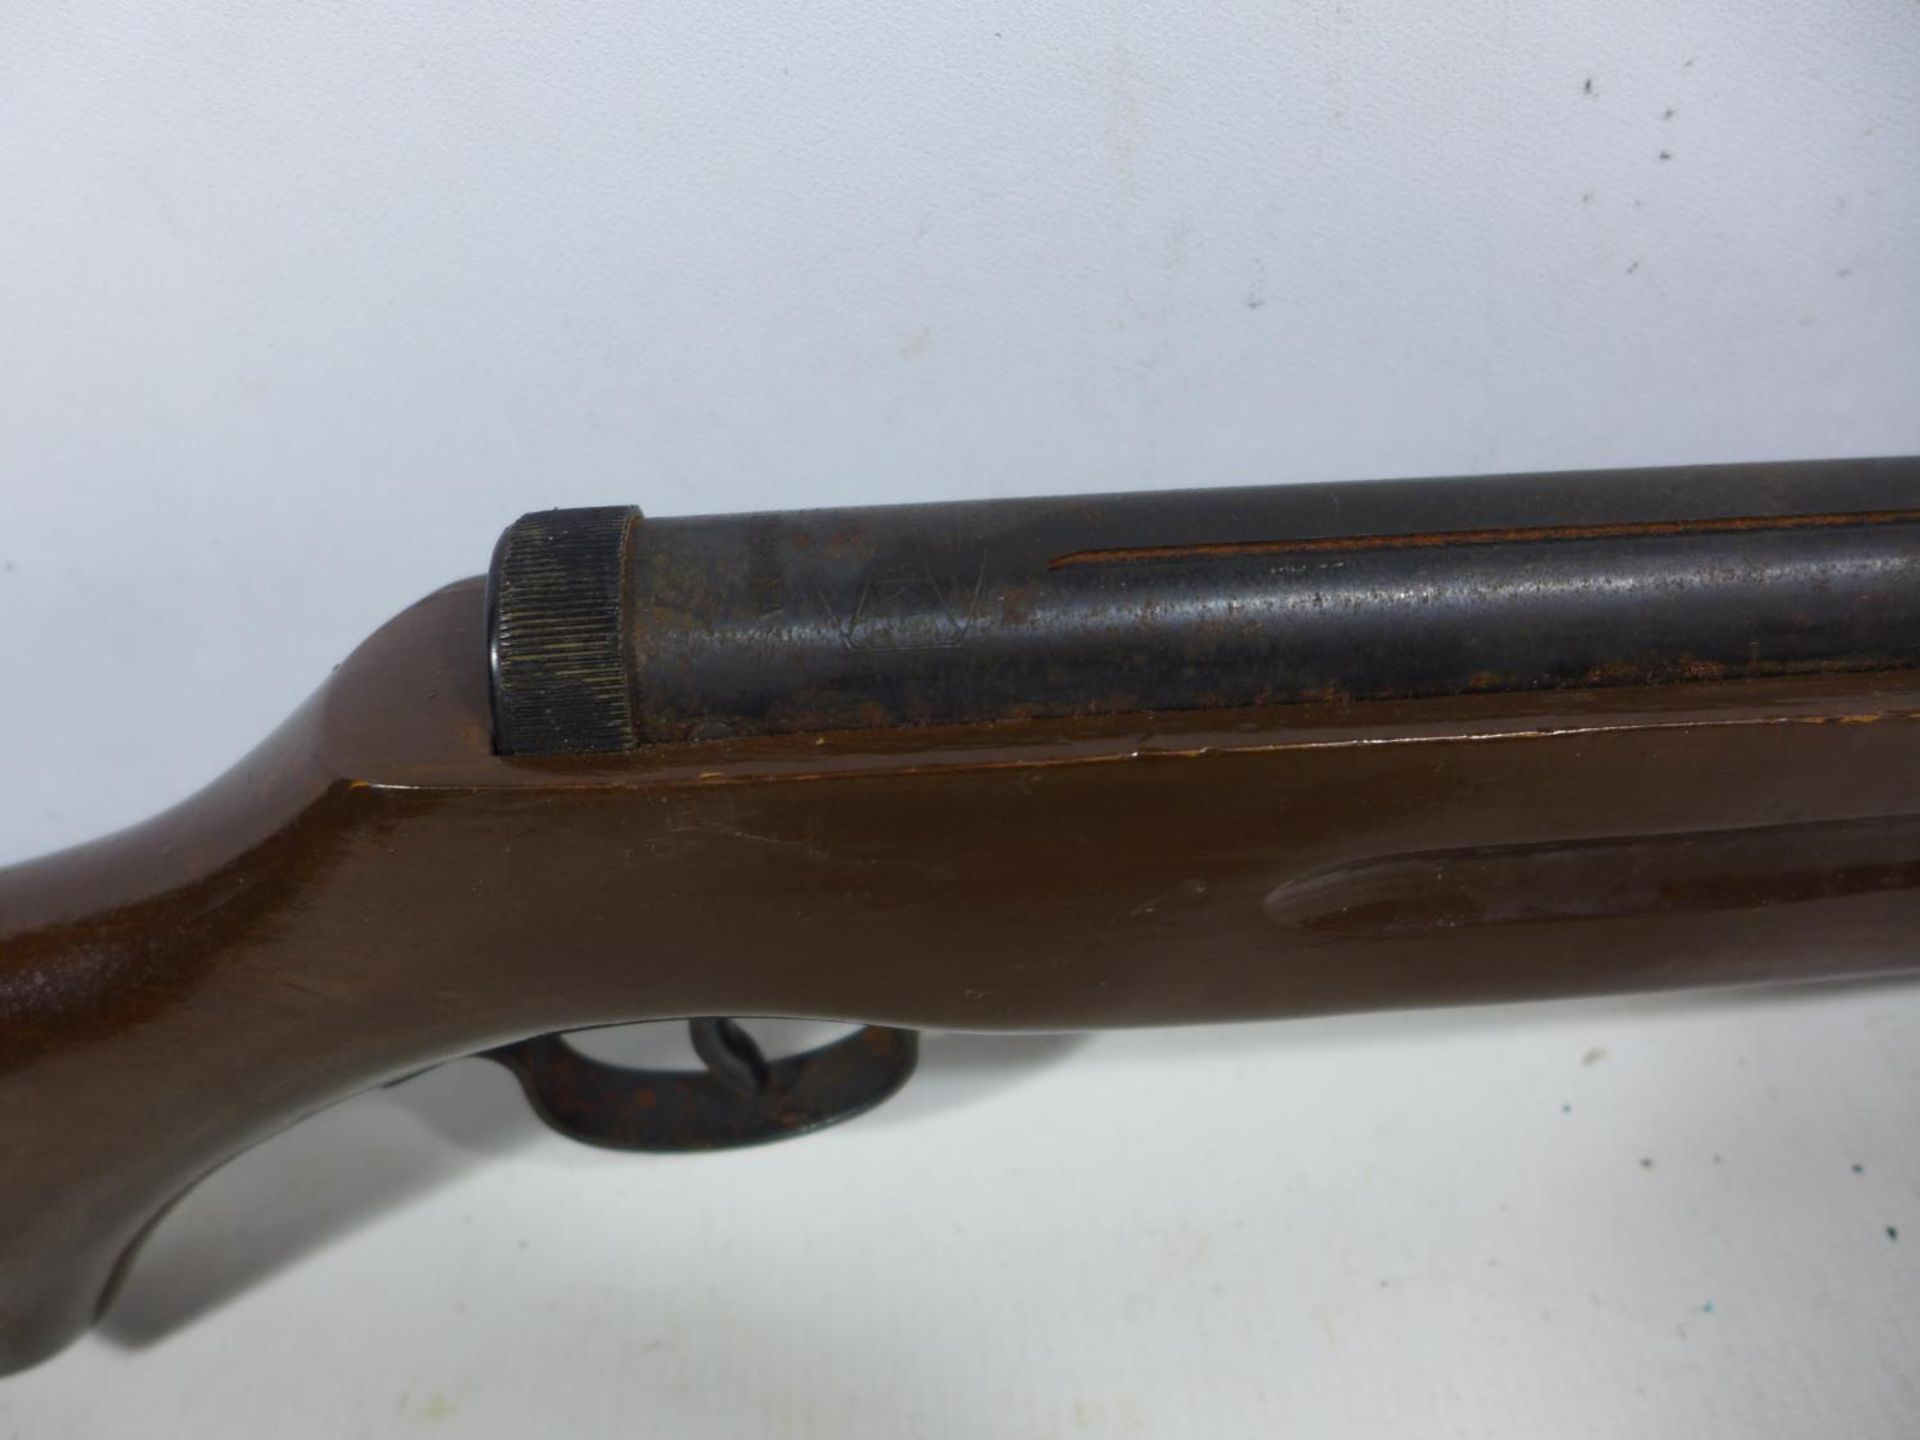 A .22 CALIBRE AIR RIFLE SERIAL NUMBER 110424451, 36CM BARREL, LENGTH 96CM, TOGETHER WITH SLIP CASE - Image 5 of 8